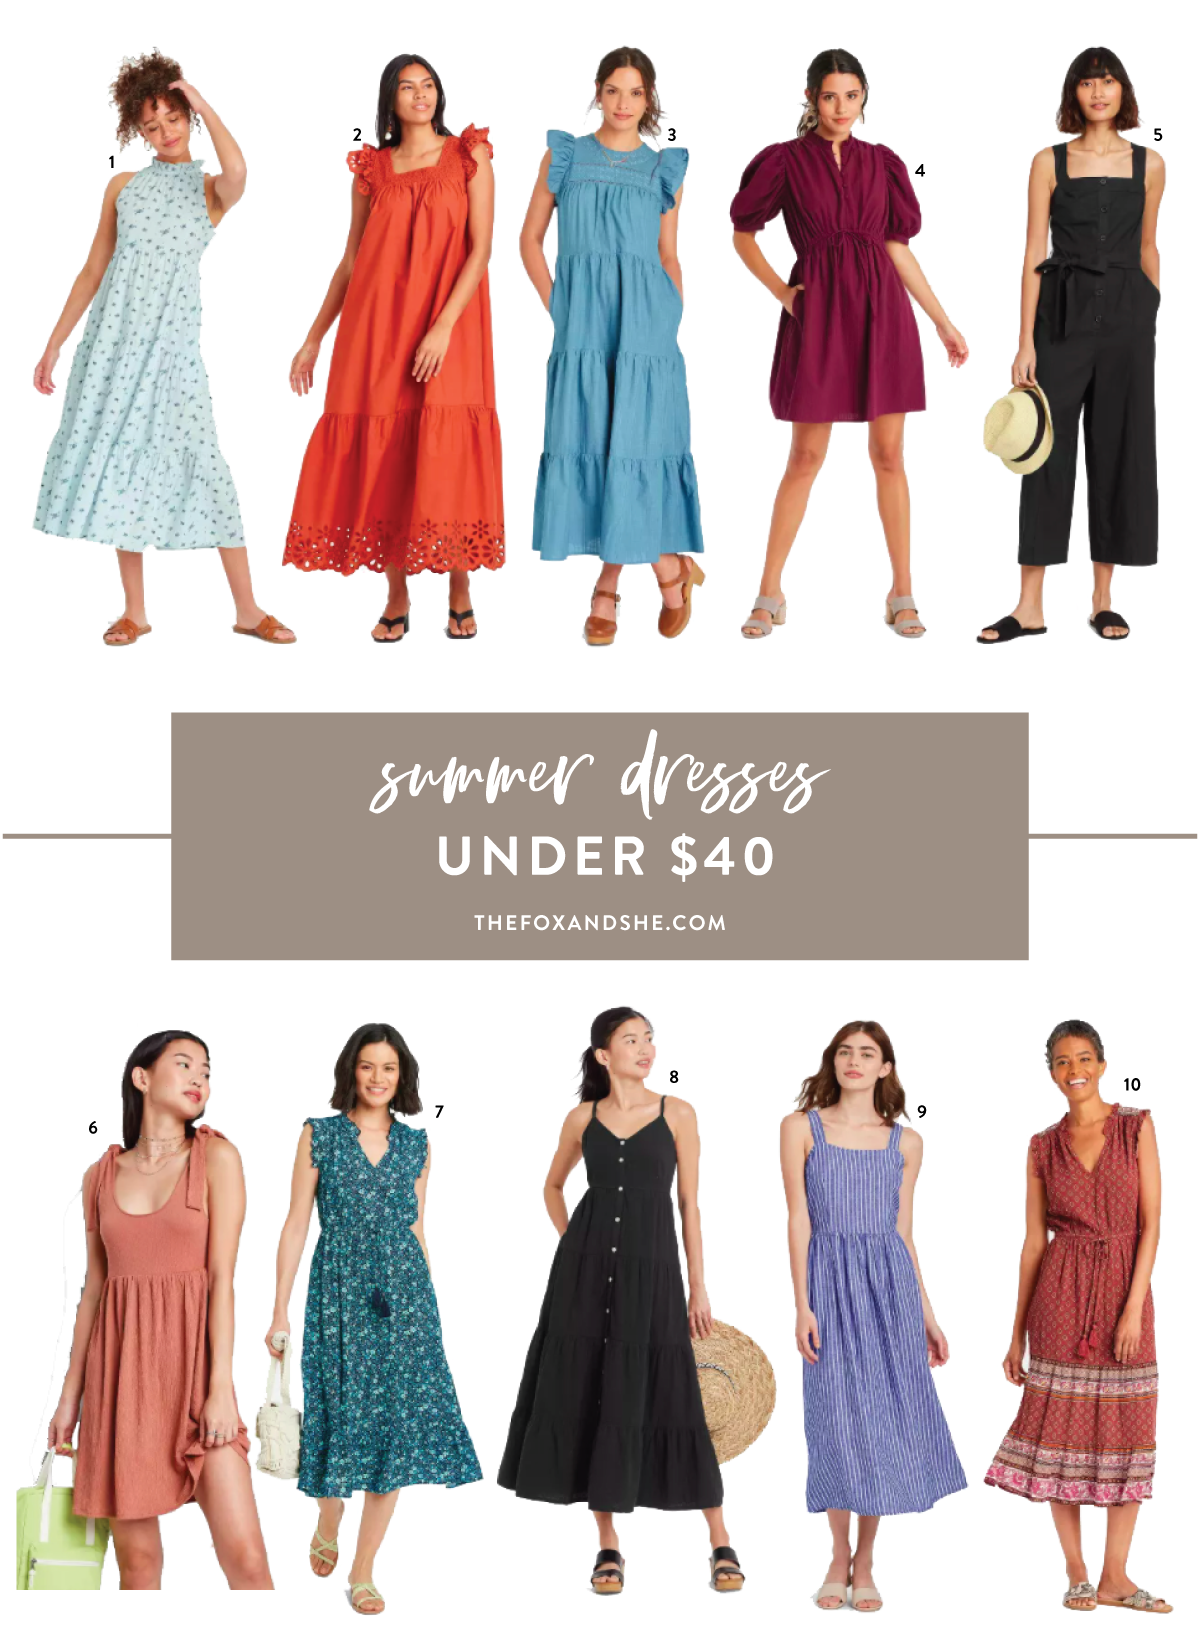 Summer dresses under $40, perfect for backyard BBQs, parties and everyday wear